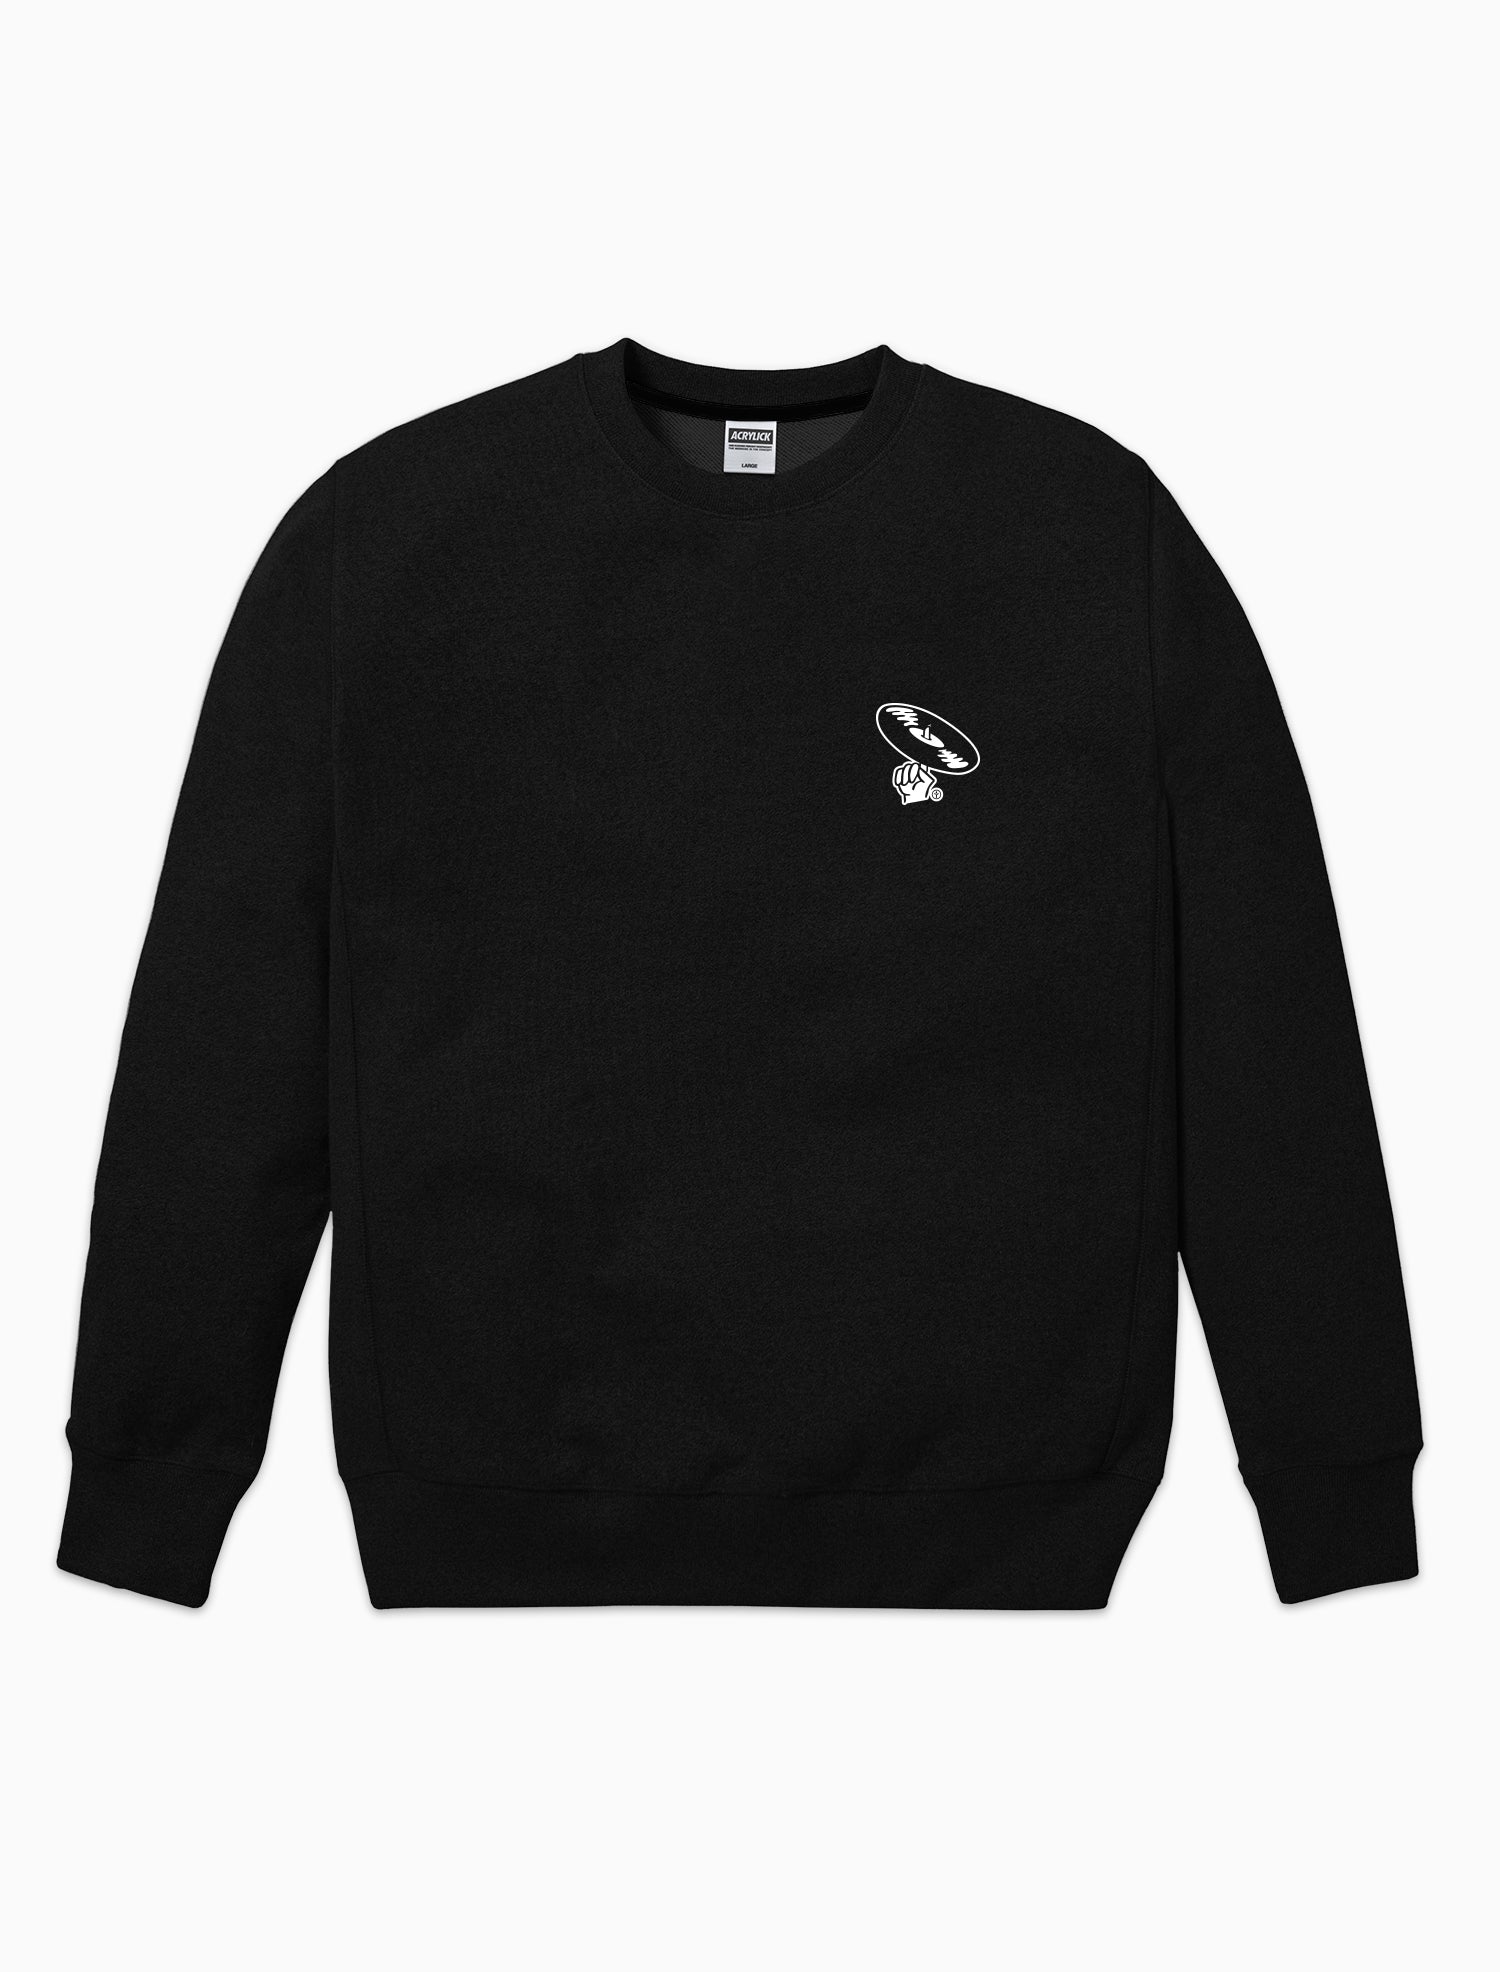 Acrylick Goods - One Nation Crewneck Available in Black and Charcoal Heather